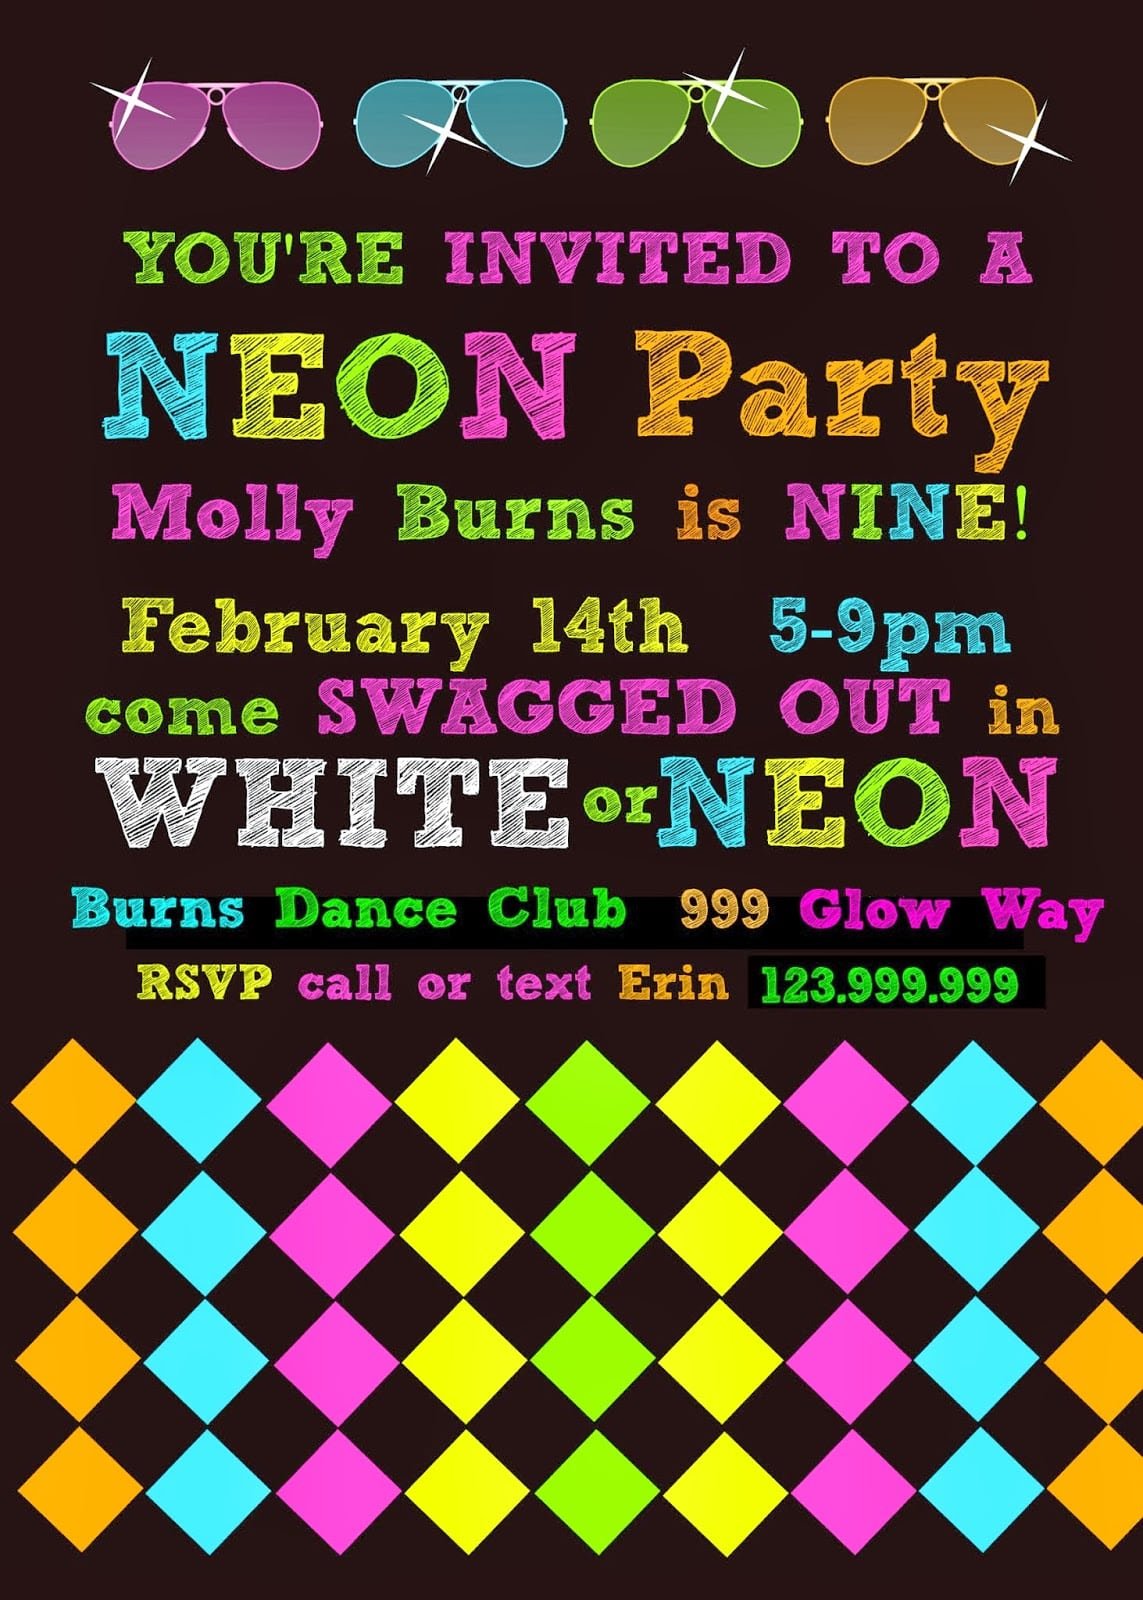 Bringing Up Burns  Molly's Ninth Neon Glow In The Dark Dance